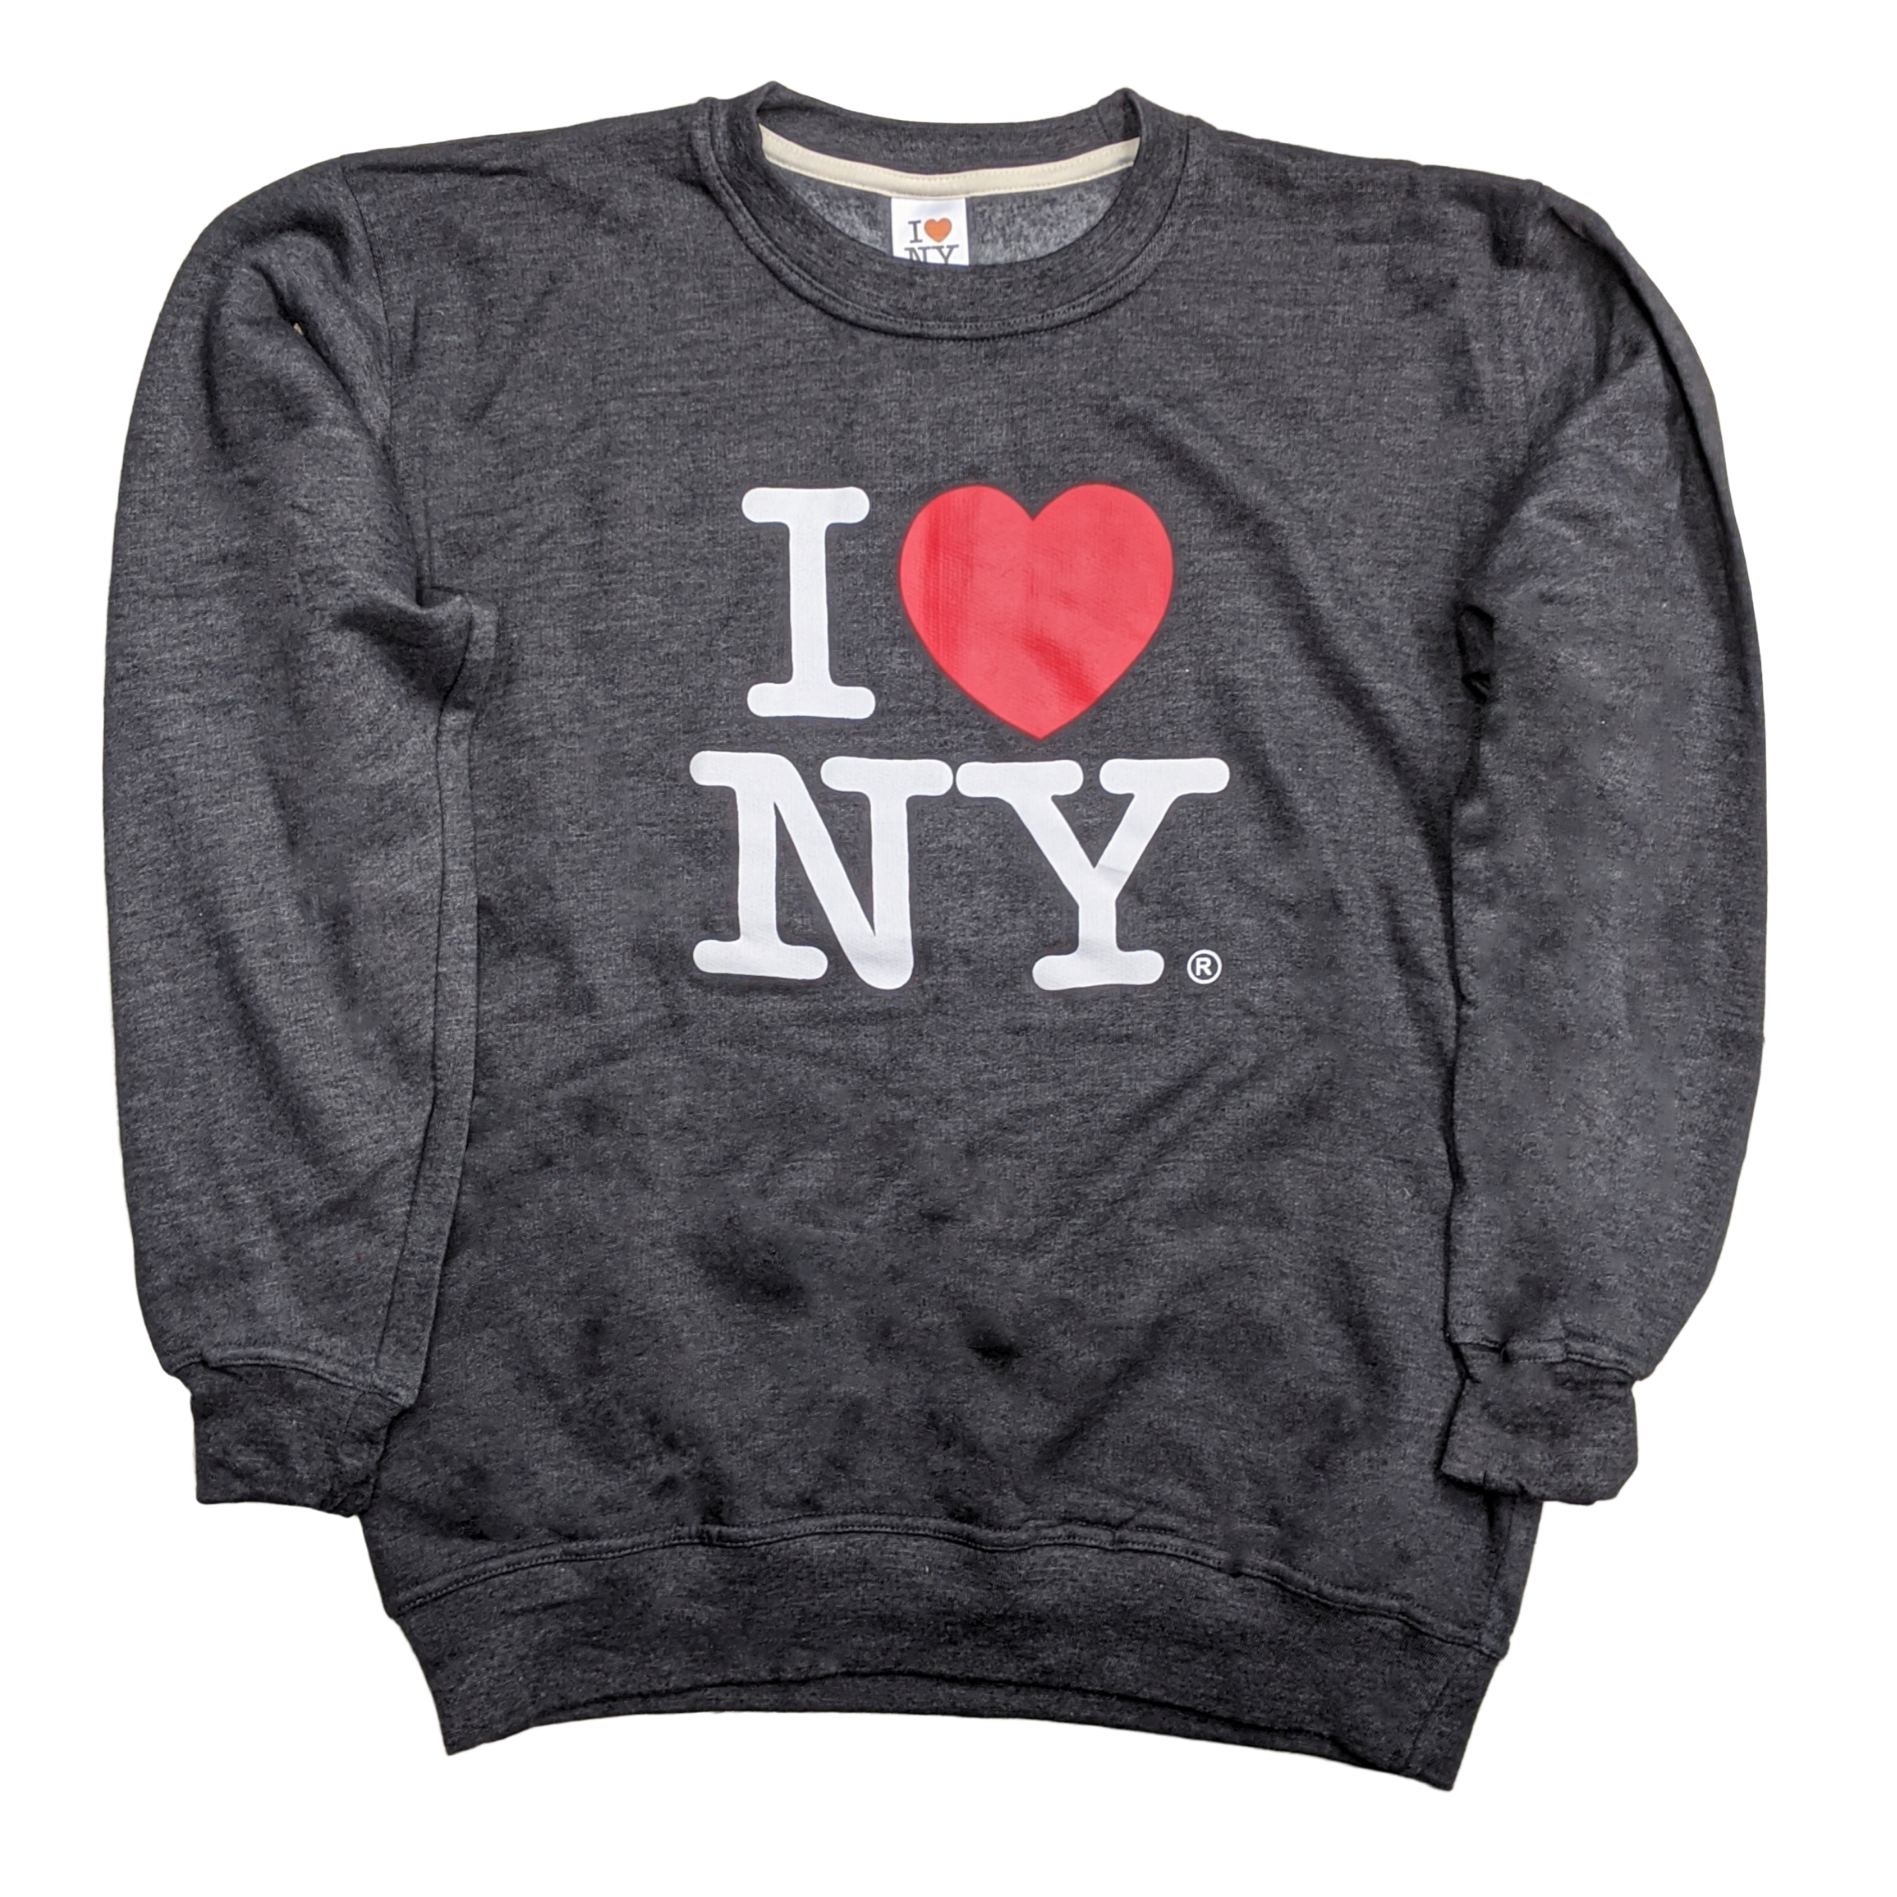 I Love NY Crewneck Sweatshirts Now In Stock - Direct From NYC - Buy Today!